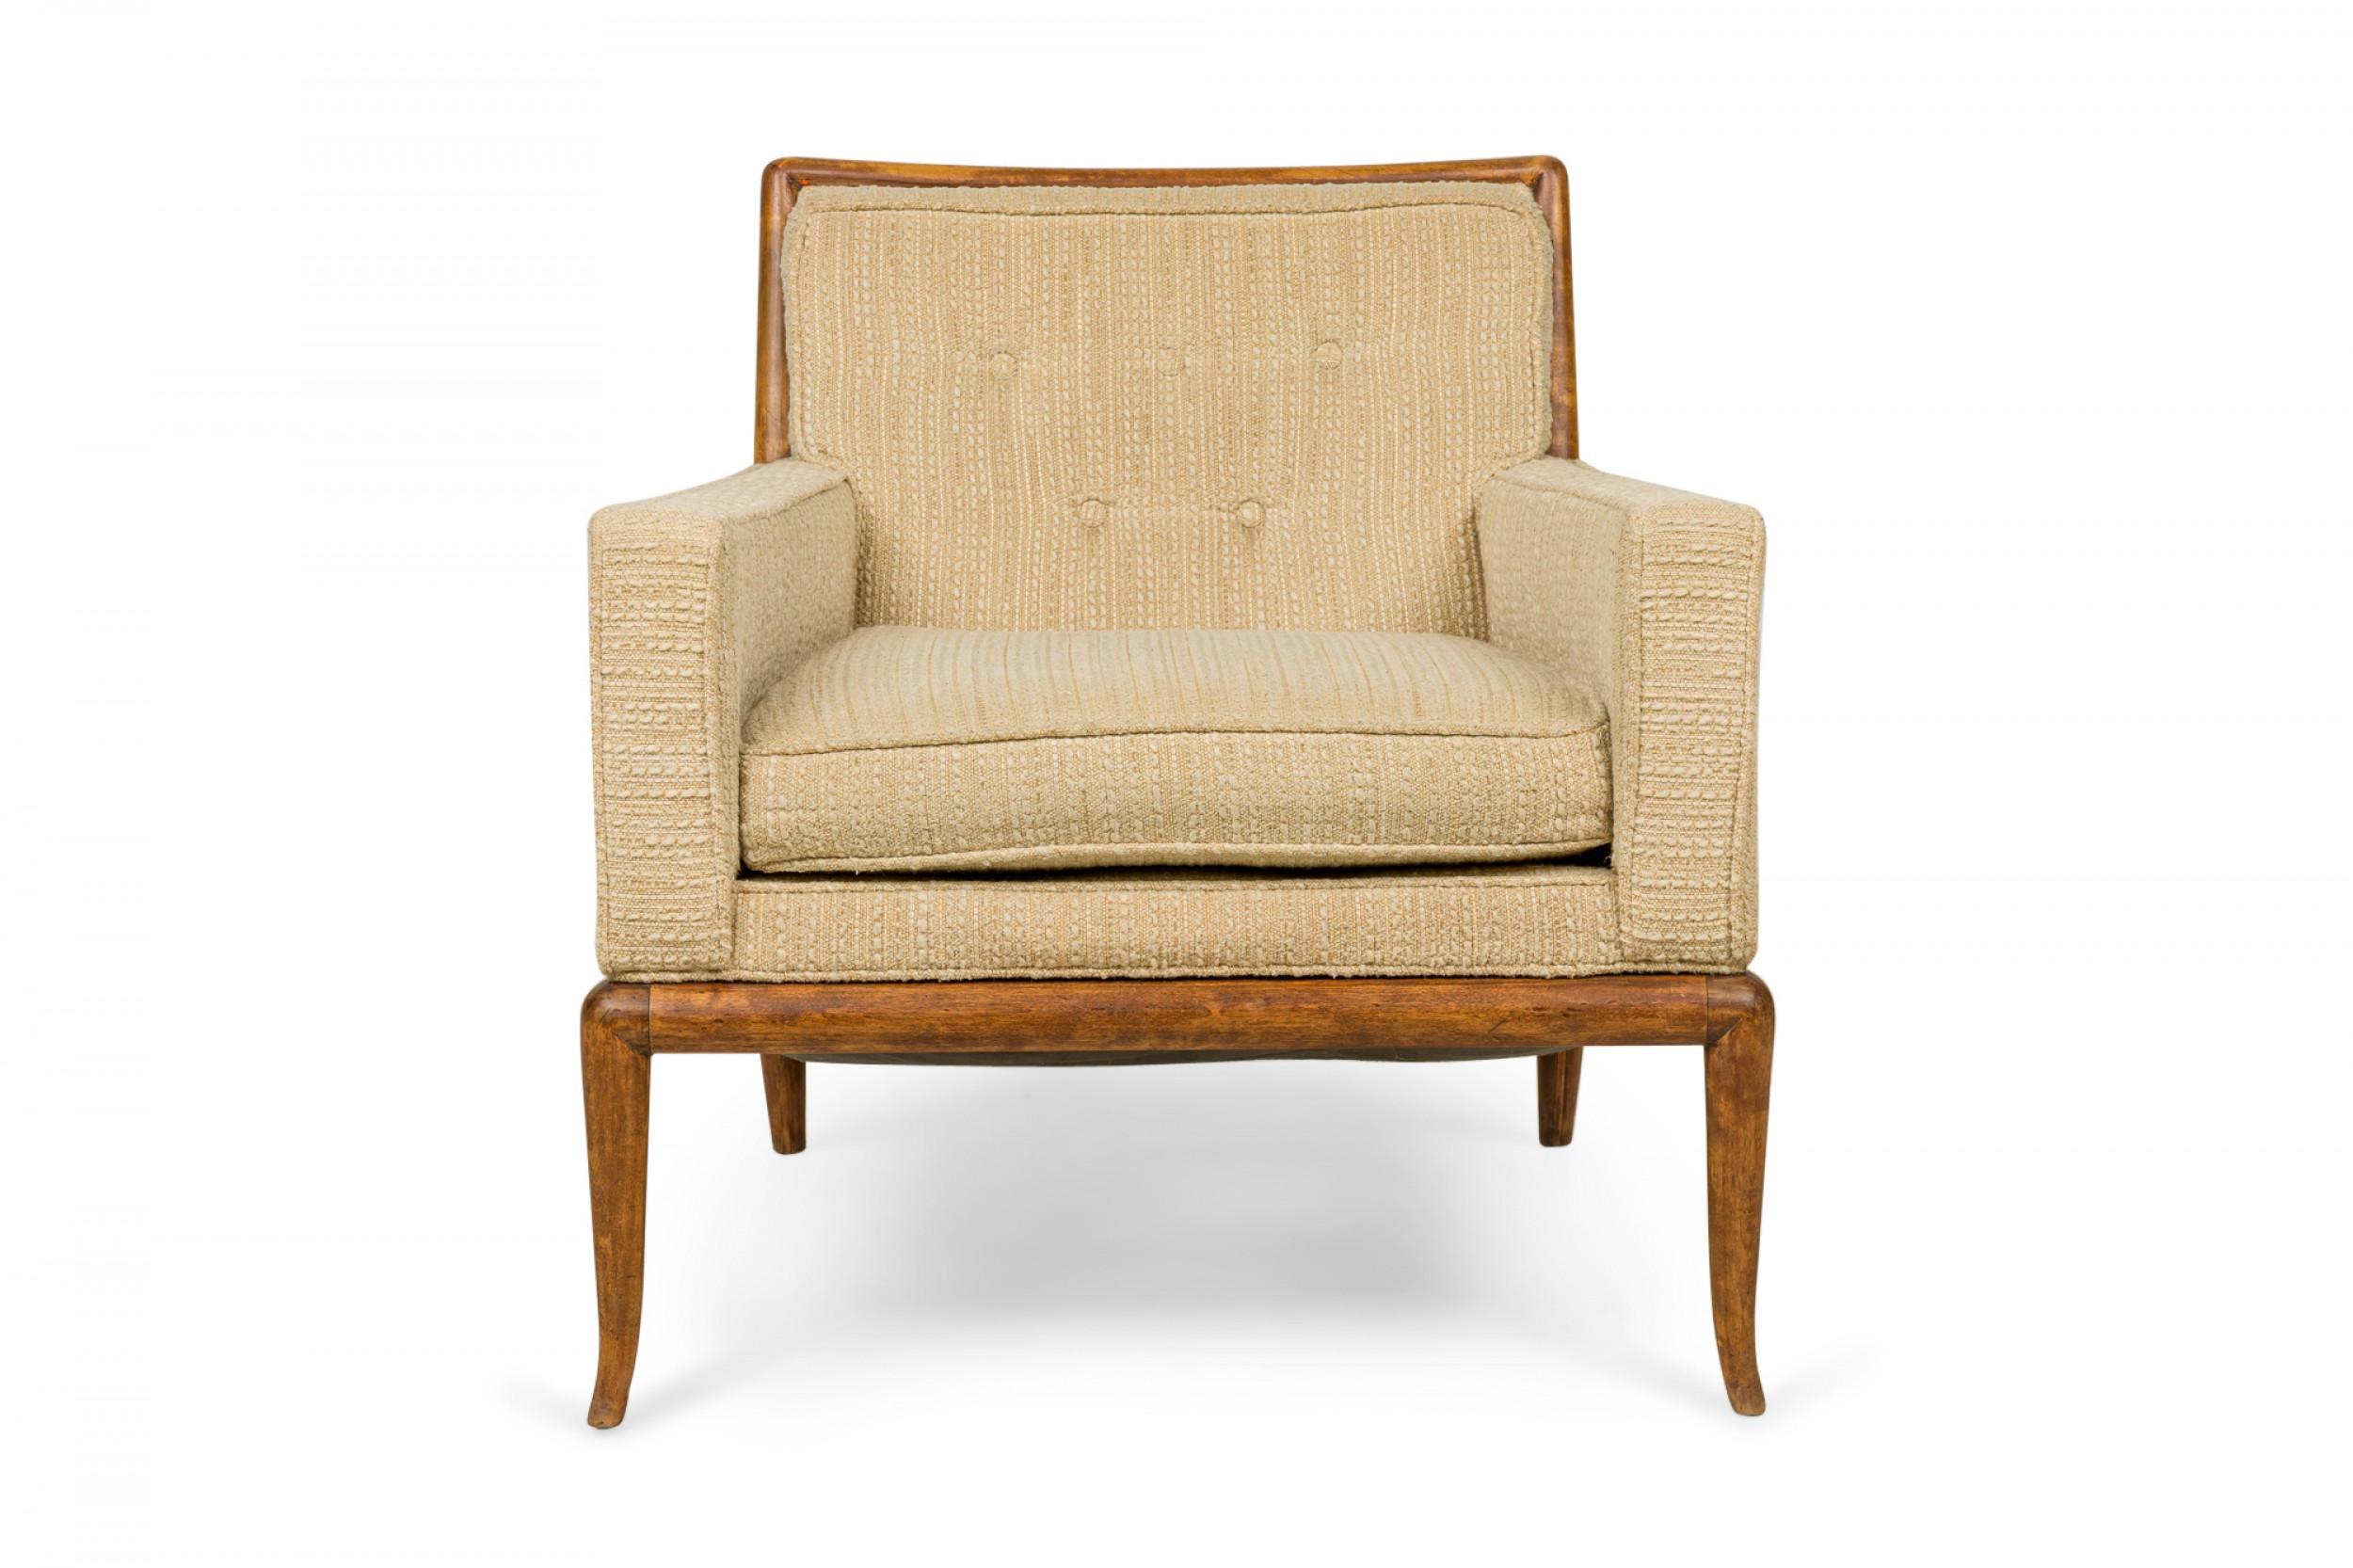 Pair of American mid-century lounge / armchairs with textured beige fabric upholstery with removable seat cushions and a walnut frame, resting on four gently curved and tapered walnut legs. (T.H. ROBSJOHN-GIBBINGS FOR WIDDICOMB FURNITURE